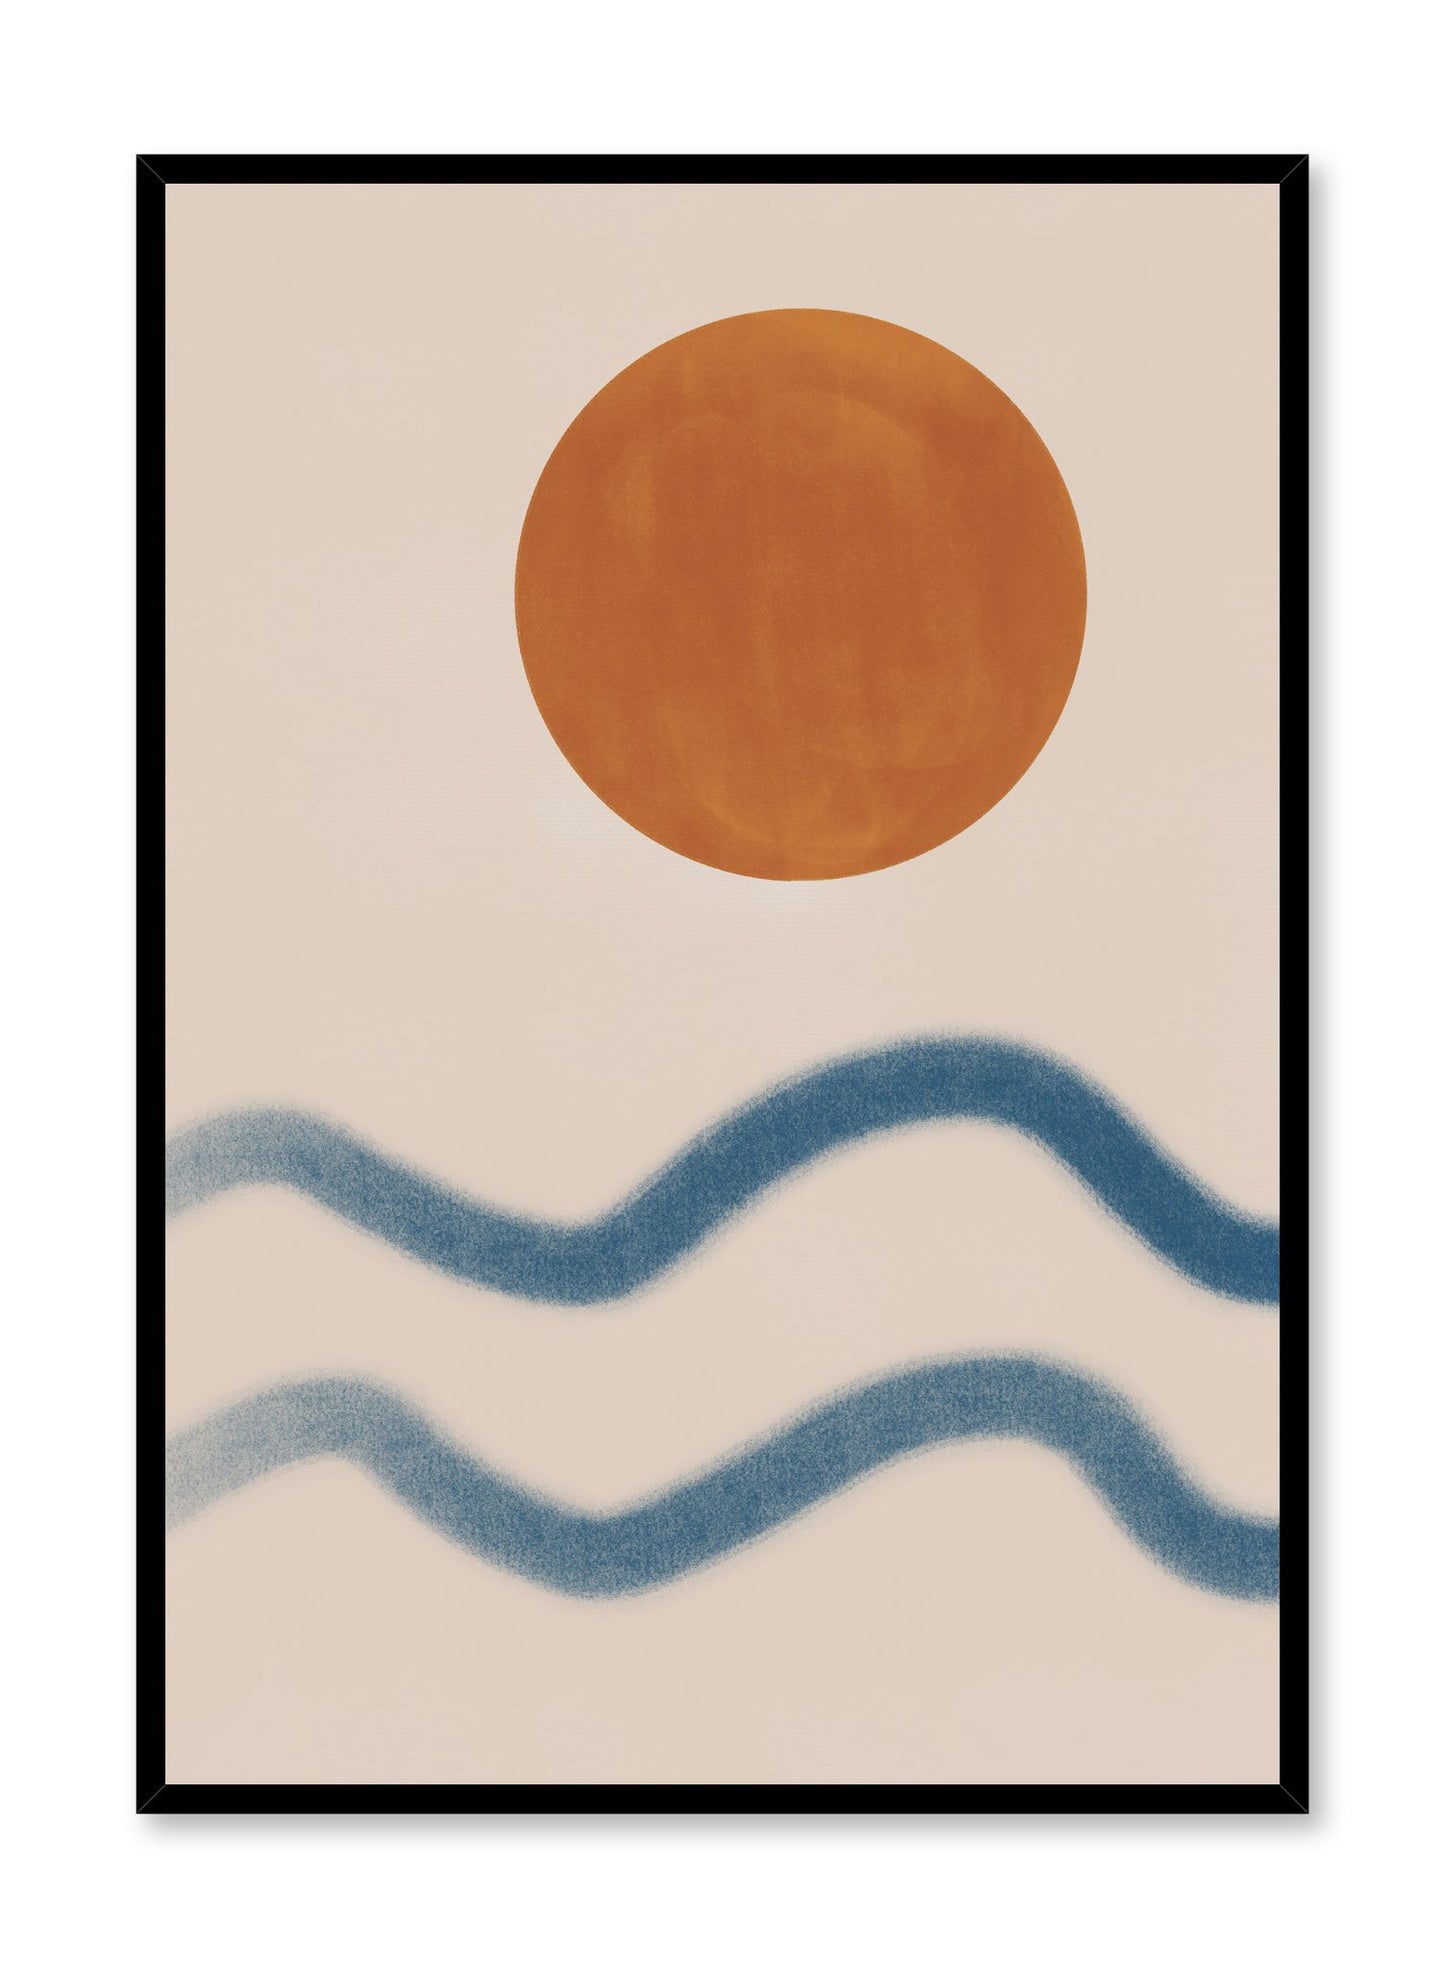 Modern minimalist poster by Opposite Wall with abstract design of Sunset at the Beach by Toffie Affichiste